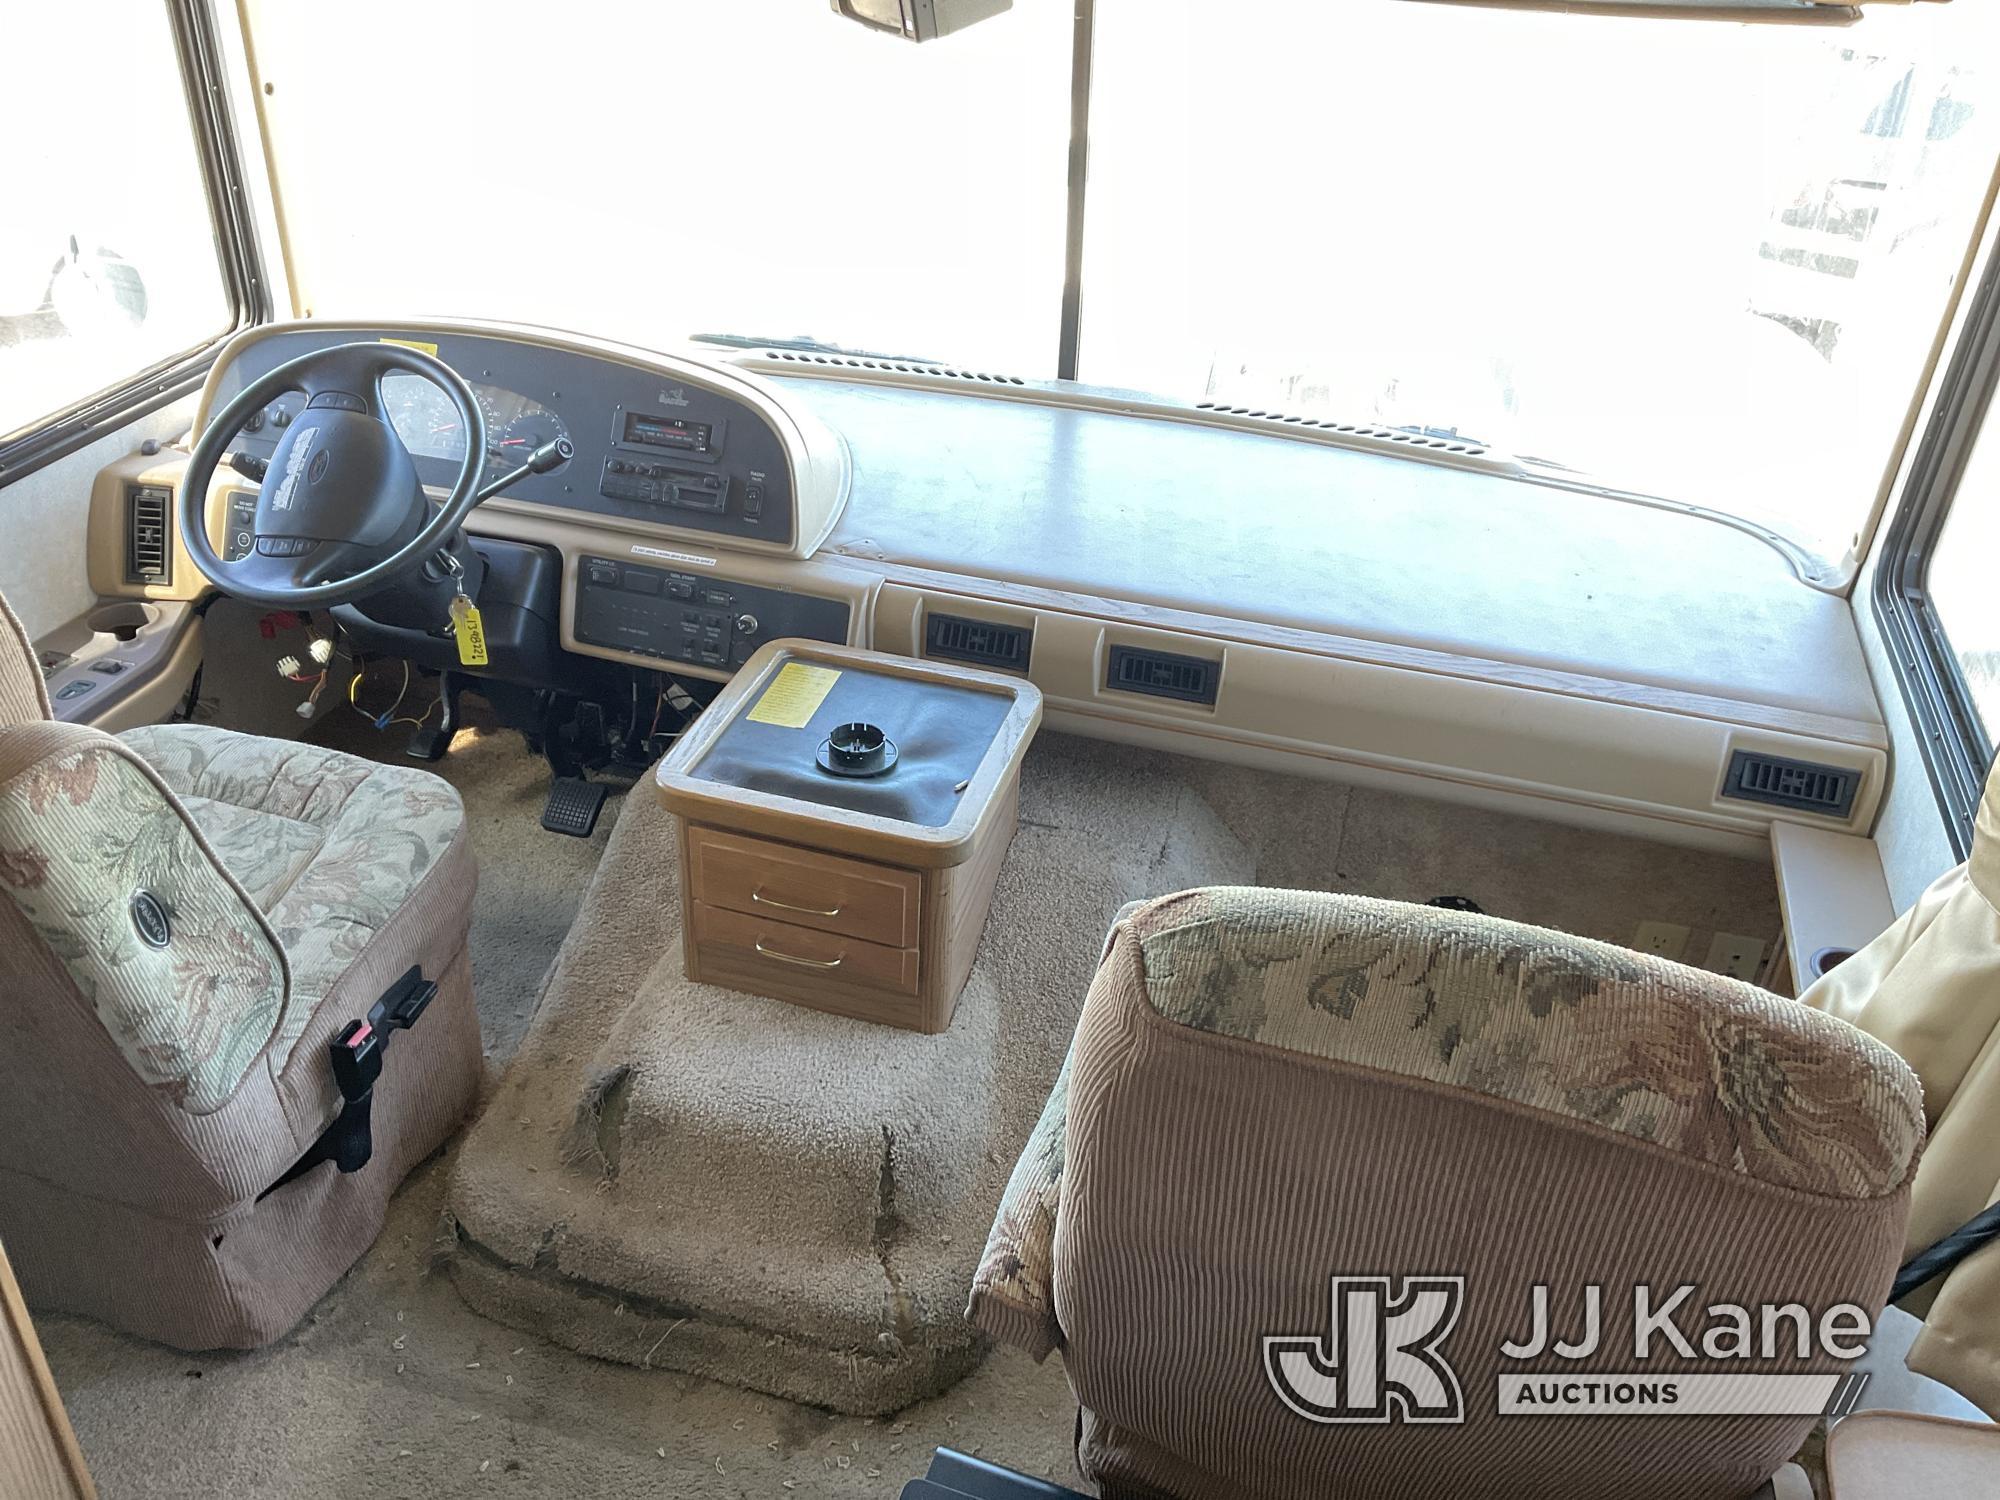 (Dixon, CA) 1999 Ford Bounder 34V RV Motor Home Runs & Moves, Needs Jump To Start, Only Runs with Ju